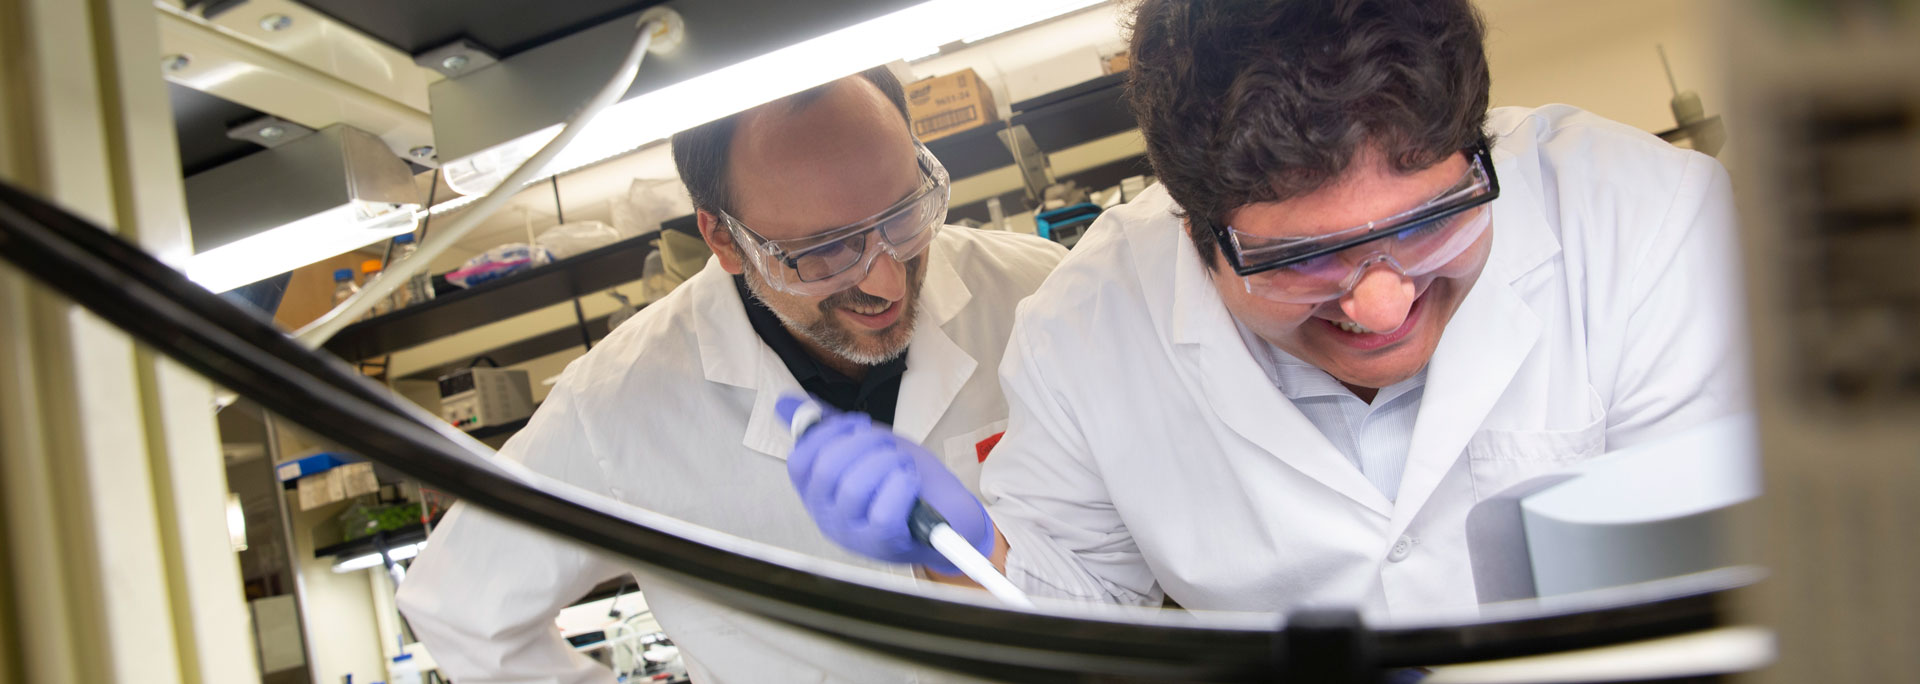 A FURI mentor and student work together in the lab.